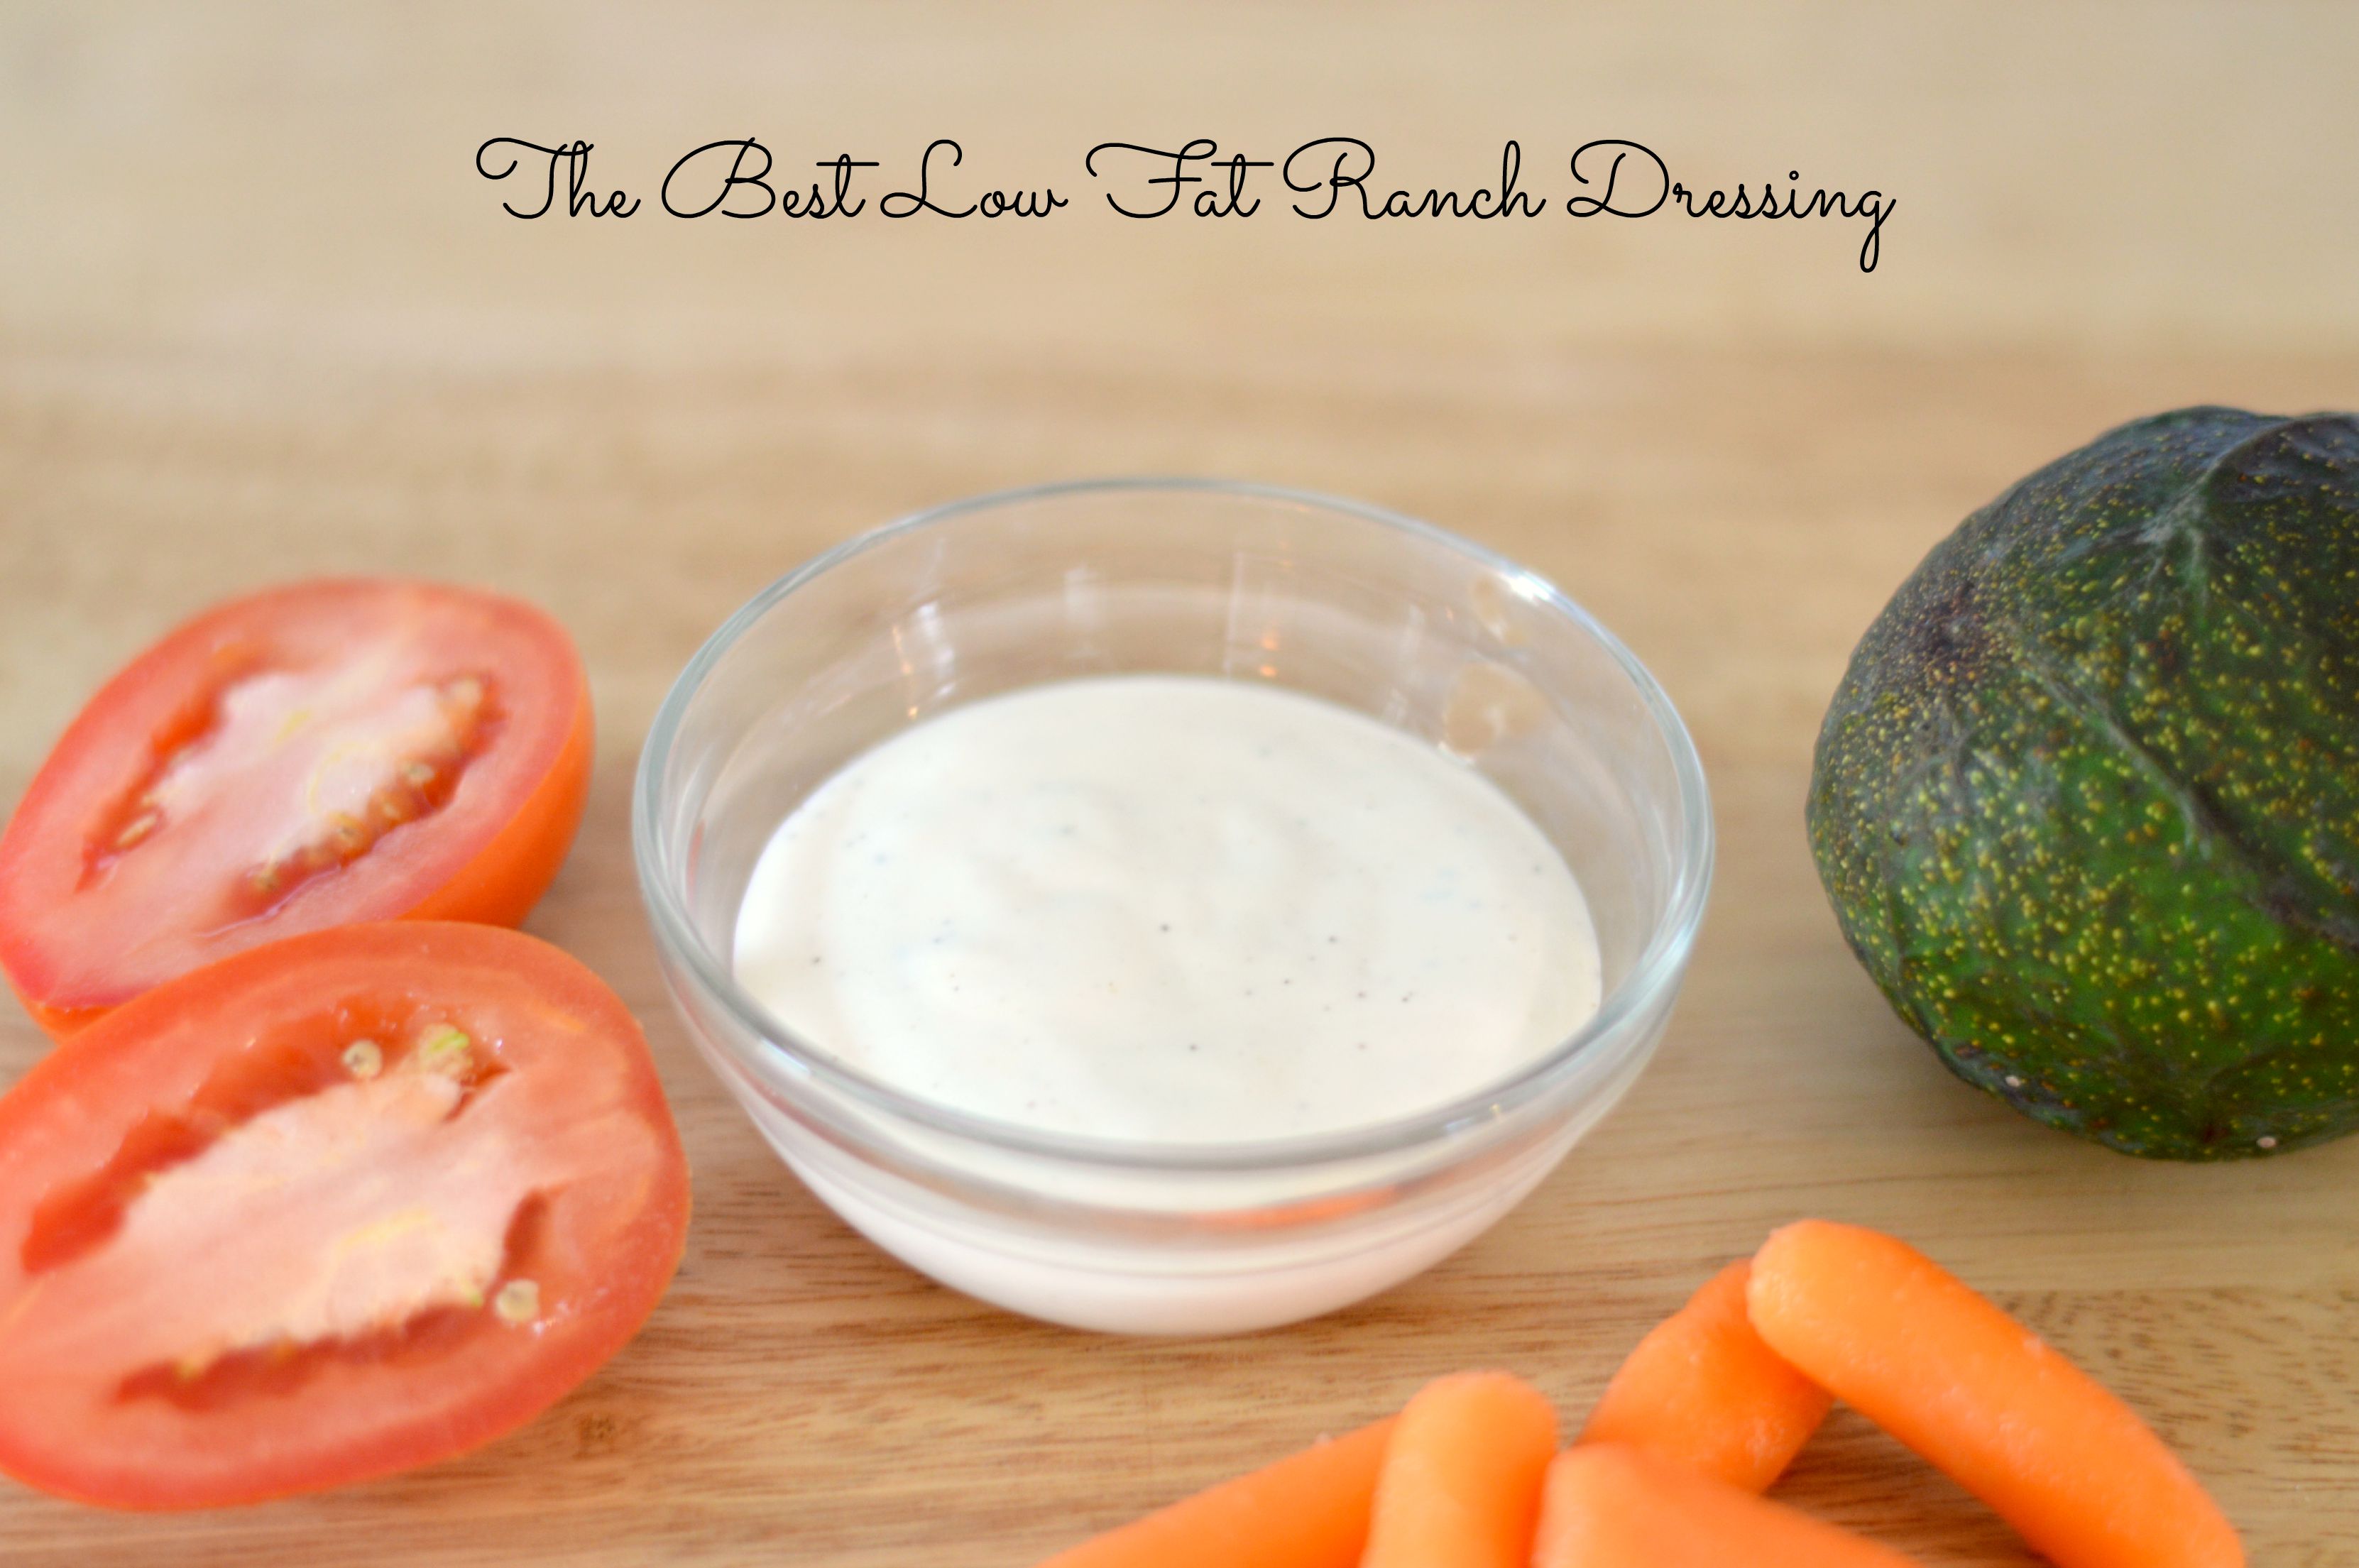 The Best Low Fat Ranch Dressing Recipe